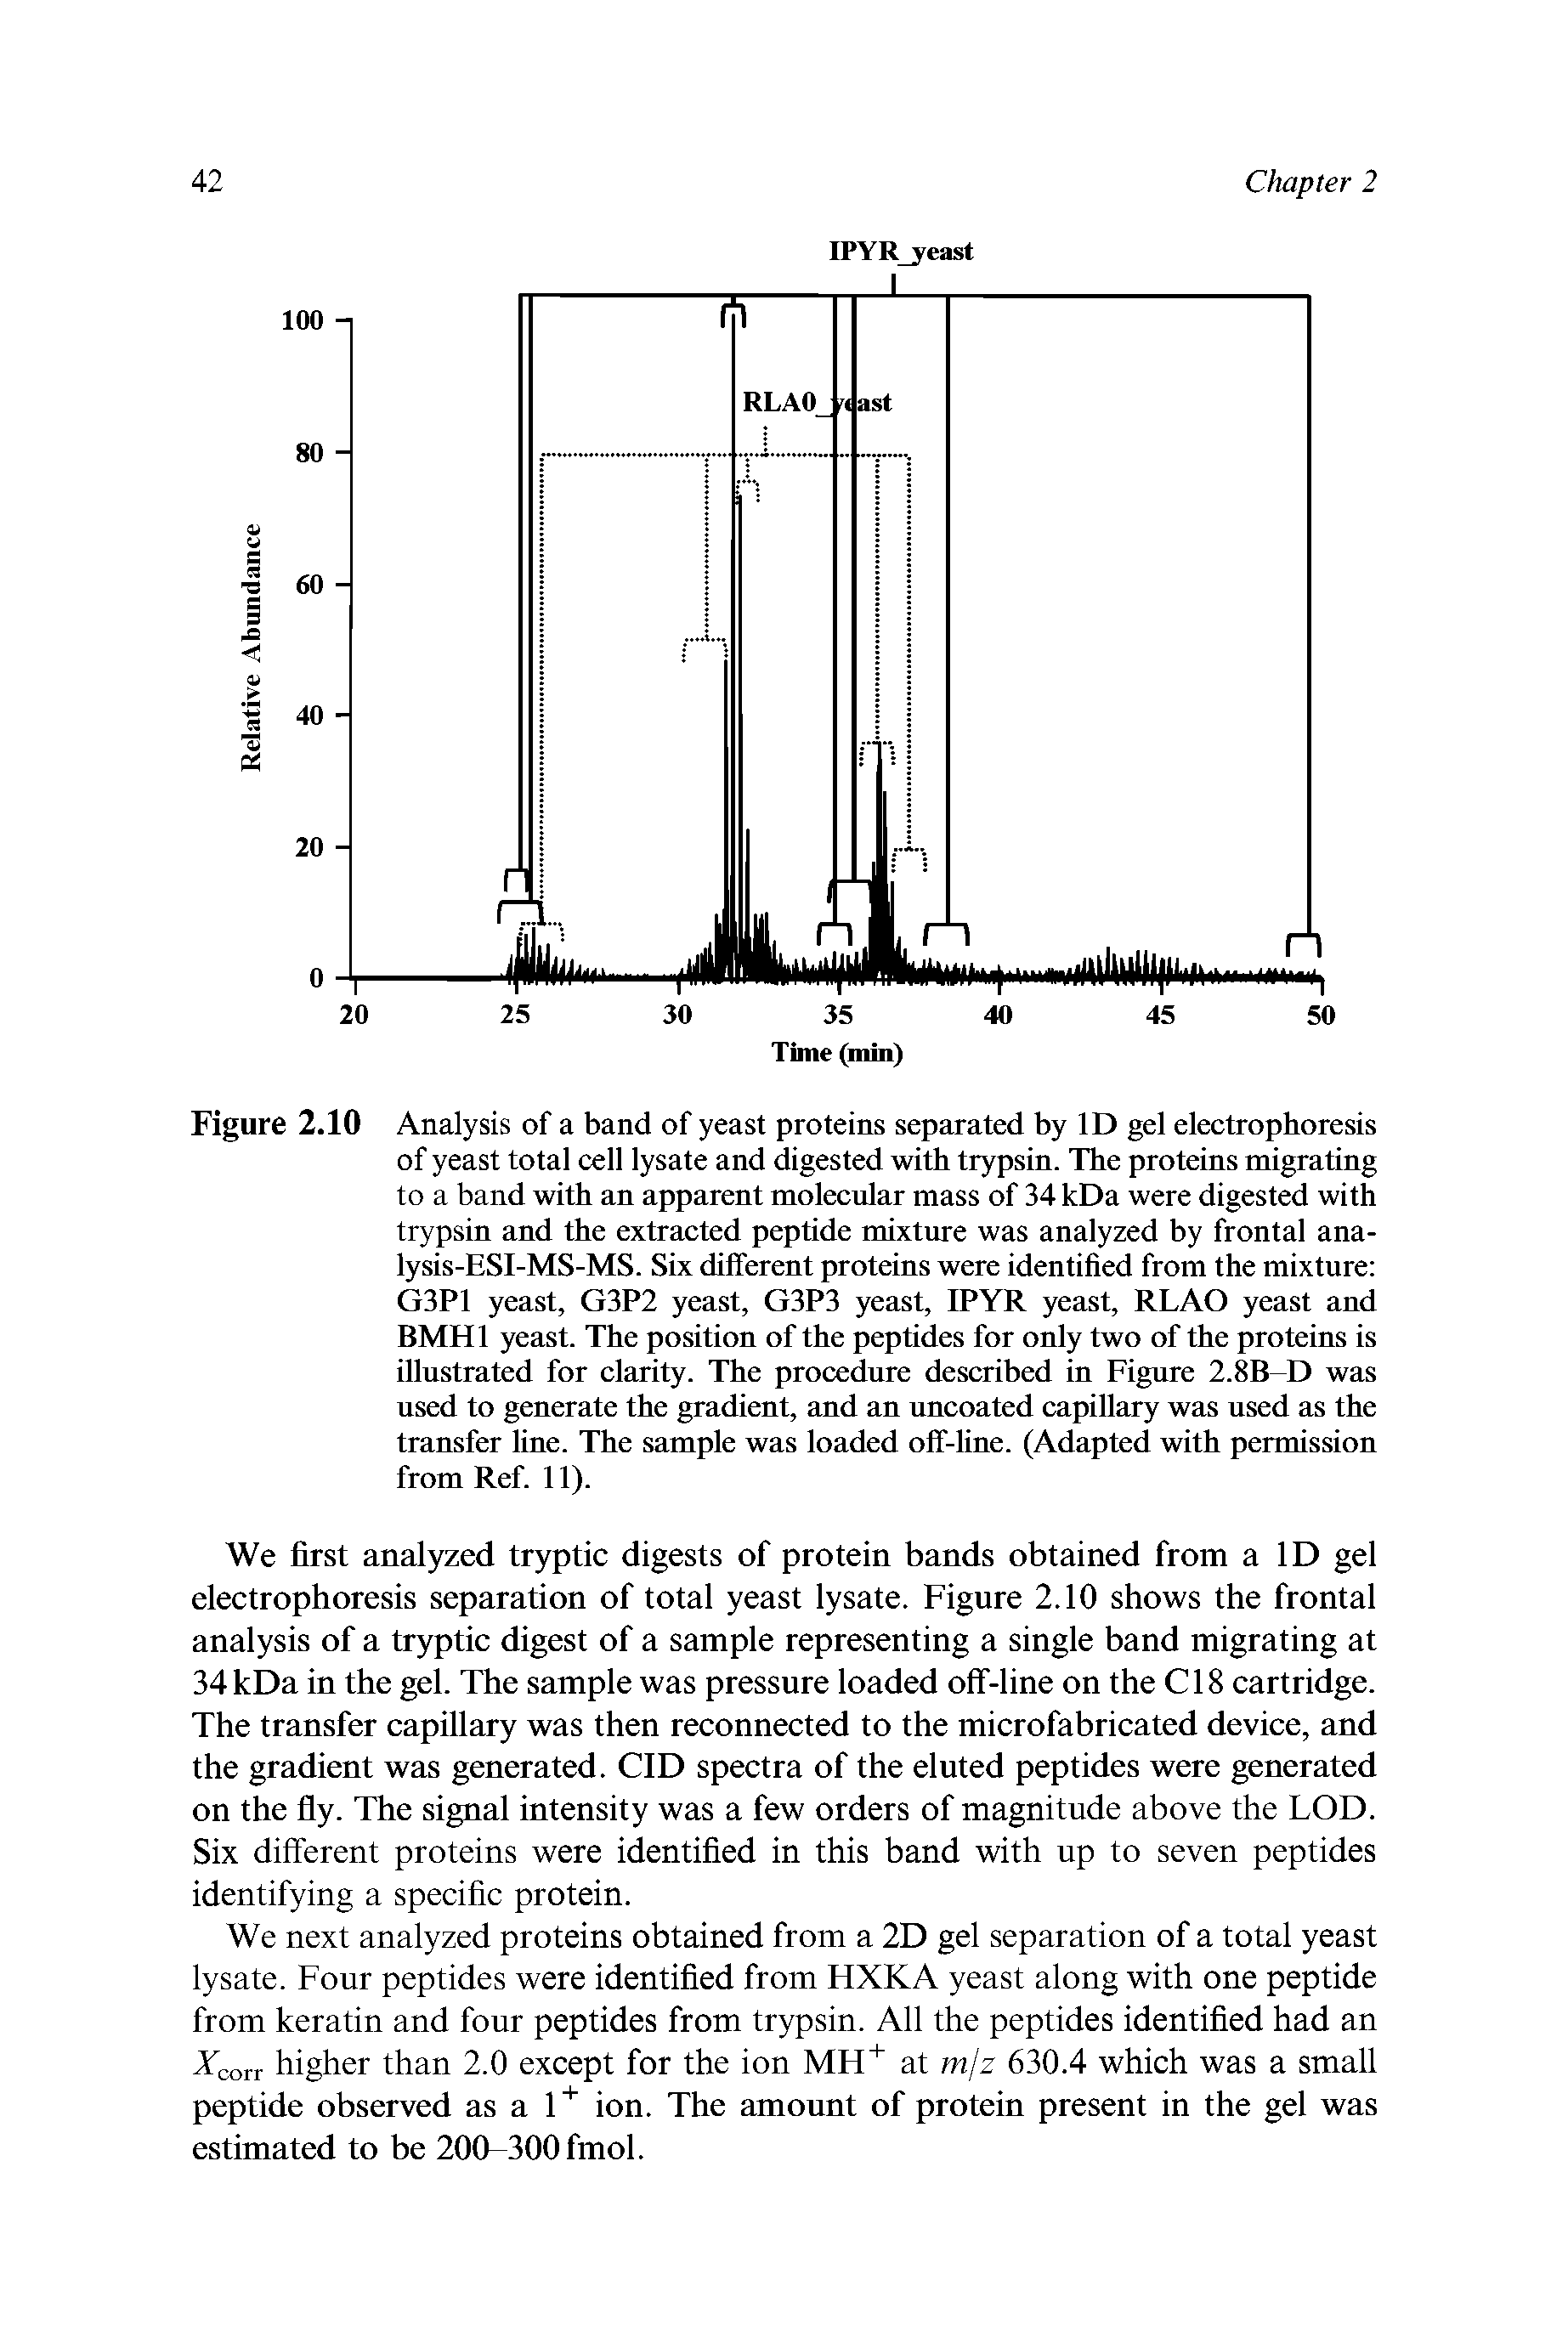 Figure 2.10 Analysis of a band of yeast proteins separated by ID gel electrophoresis of yeast total cell lysate and digested with trypsin. The proteins migrating to a band with an apparent molecular mass of 34 kDa were digested with trypsin and the extracted peptide mixture was analyzed by frontal ana-lysis-ESI-MS-MS. Six different proteins were identified from the mixture G3P1 yeast, G3P2 yeast, G3P3 yeast, IPYR yeast, RLAO yeast and BMH1 yeast. The position of the peptides for only two of the proteins is illustrated for clarity. The procedure described in Figure 2.8B-D was used to generate the gradient, and an uncoated capillary was used as the transfer line. The sample was loaded off-line. (Adapted with permission from Ref. 11).